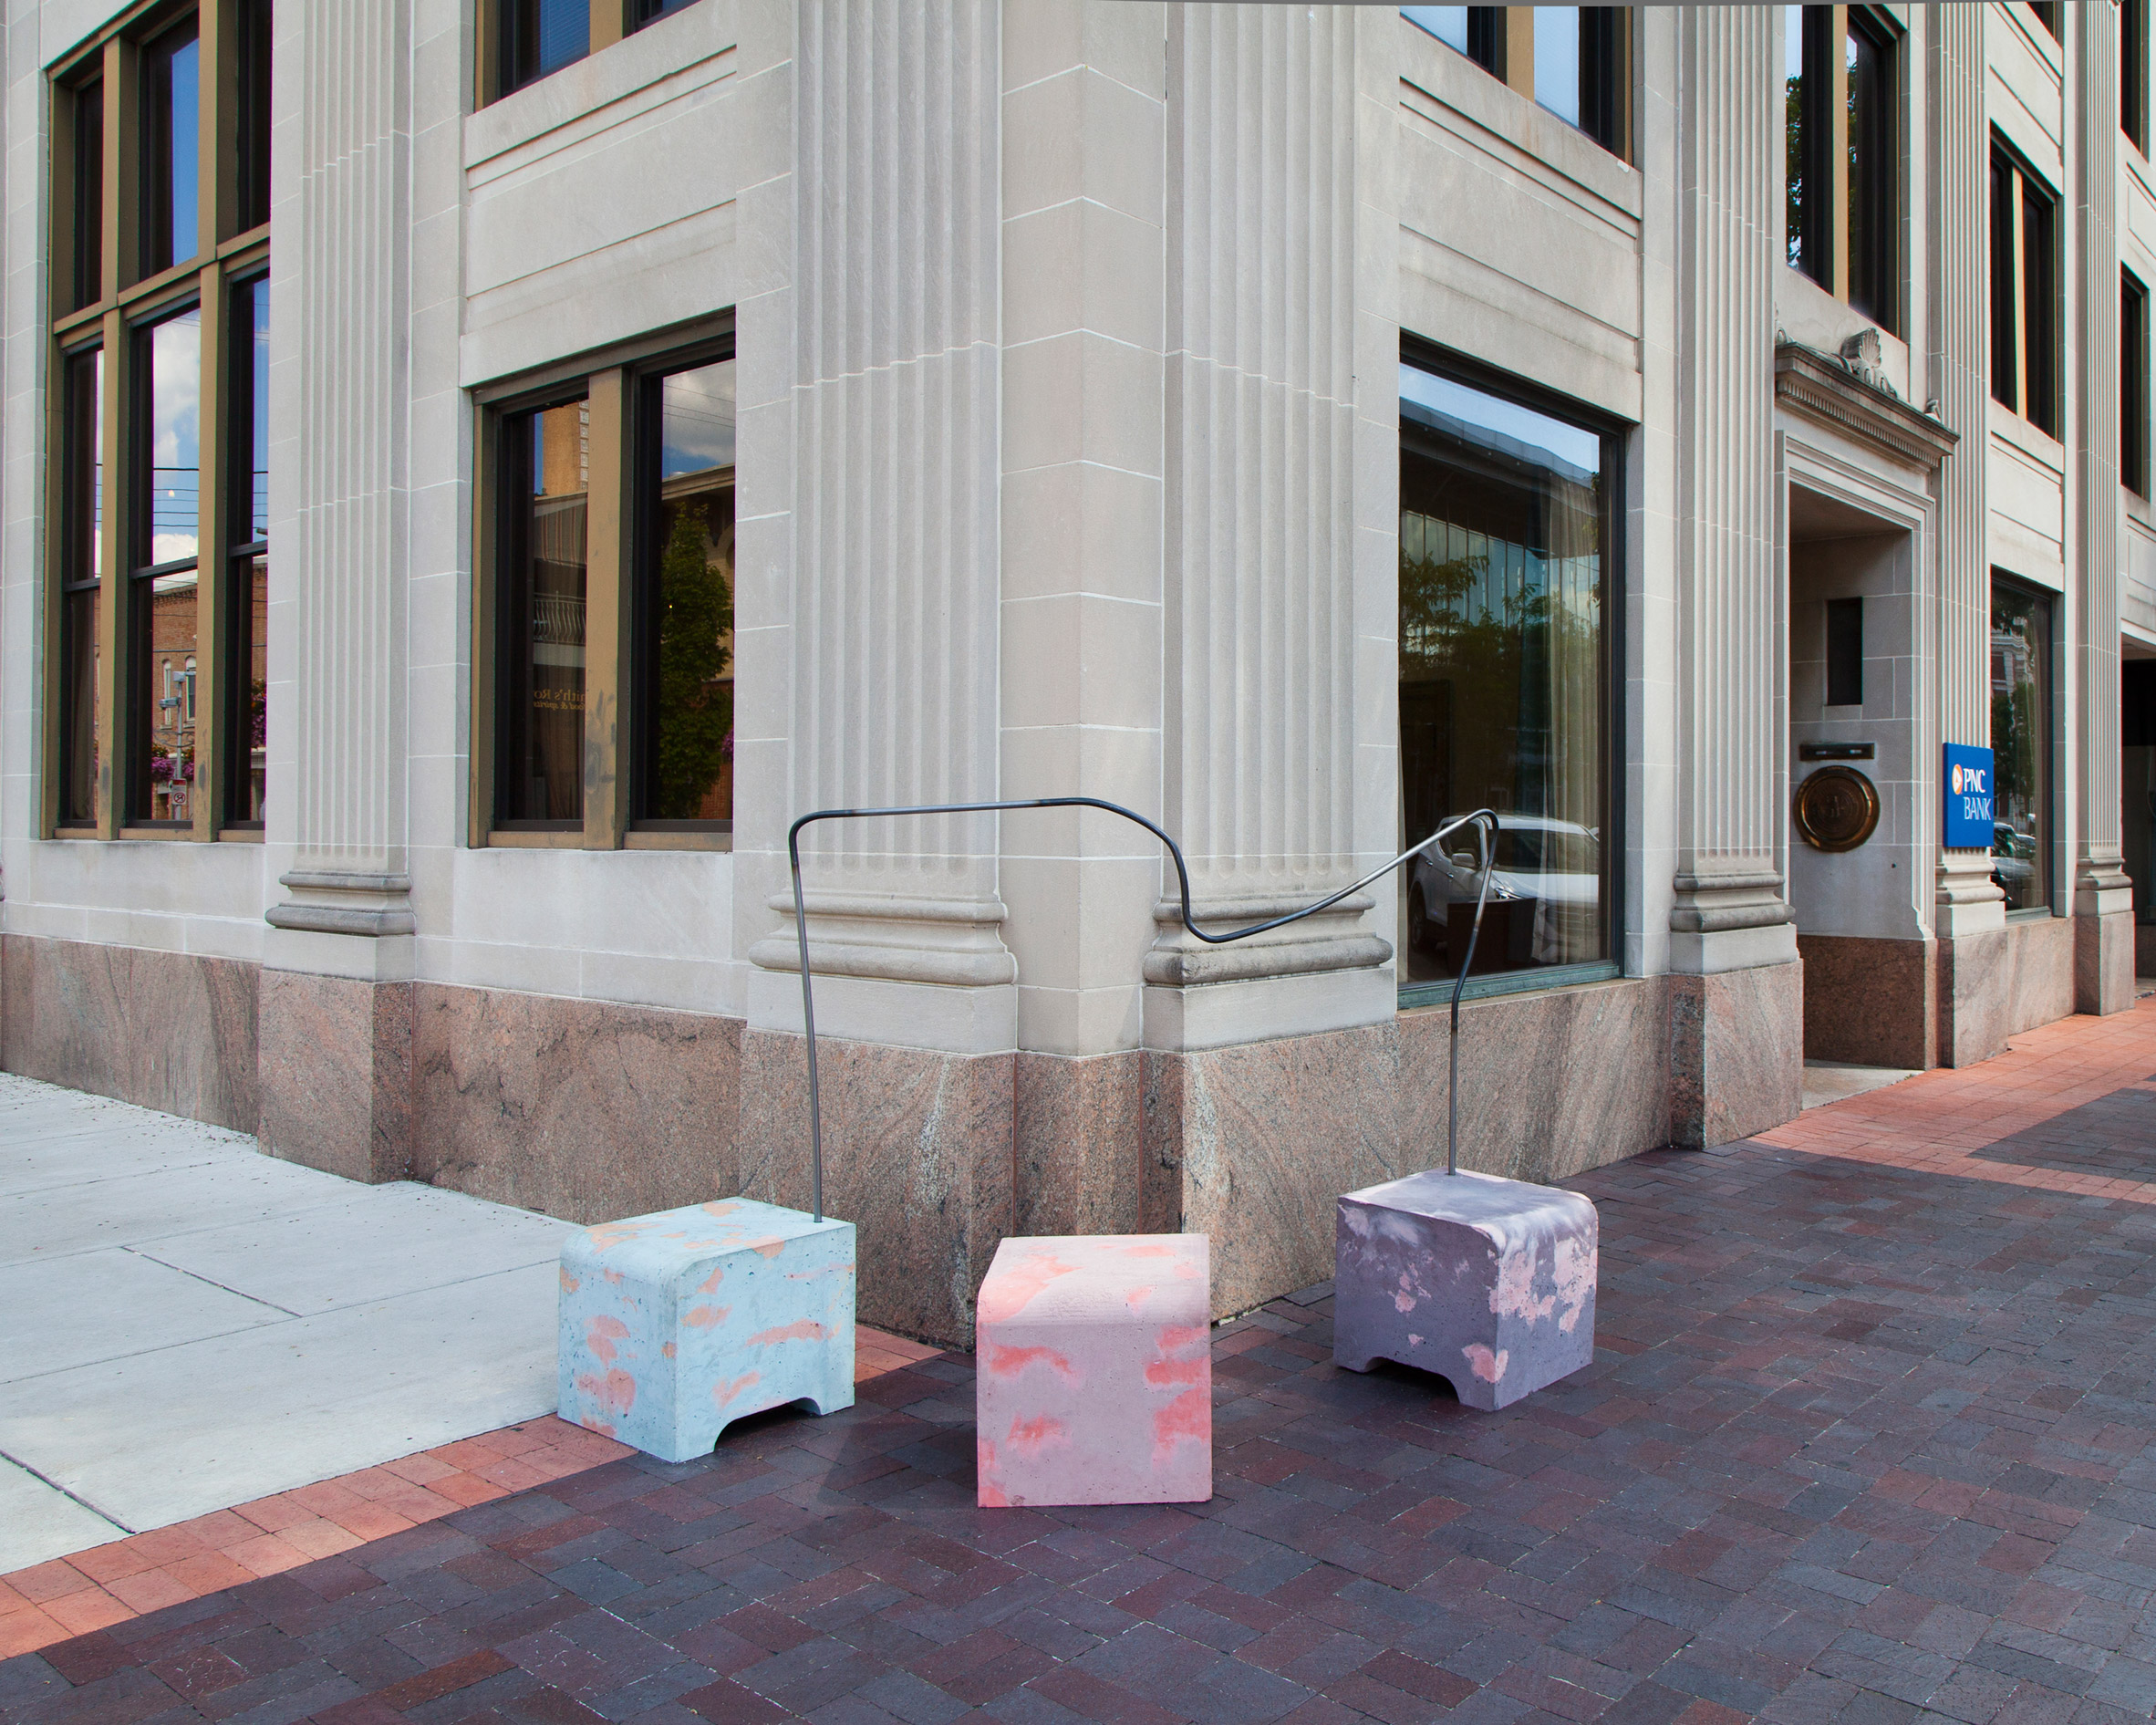 Pause by Pettersen & Hein for Washingston Street Installations by Exhibit Columbus